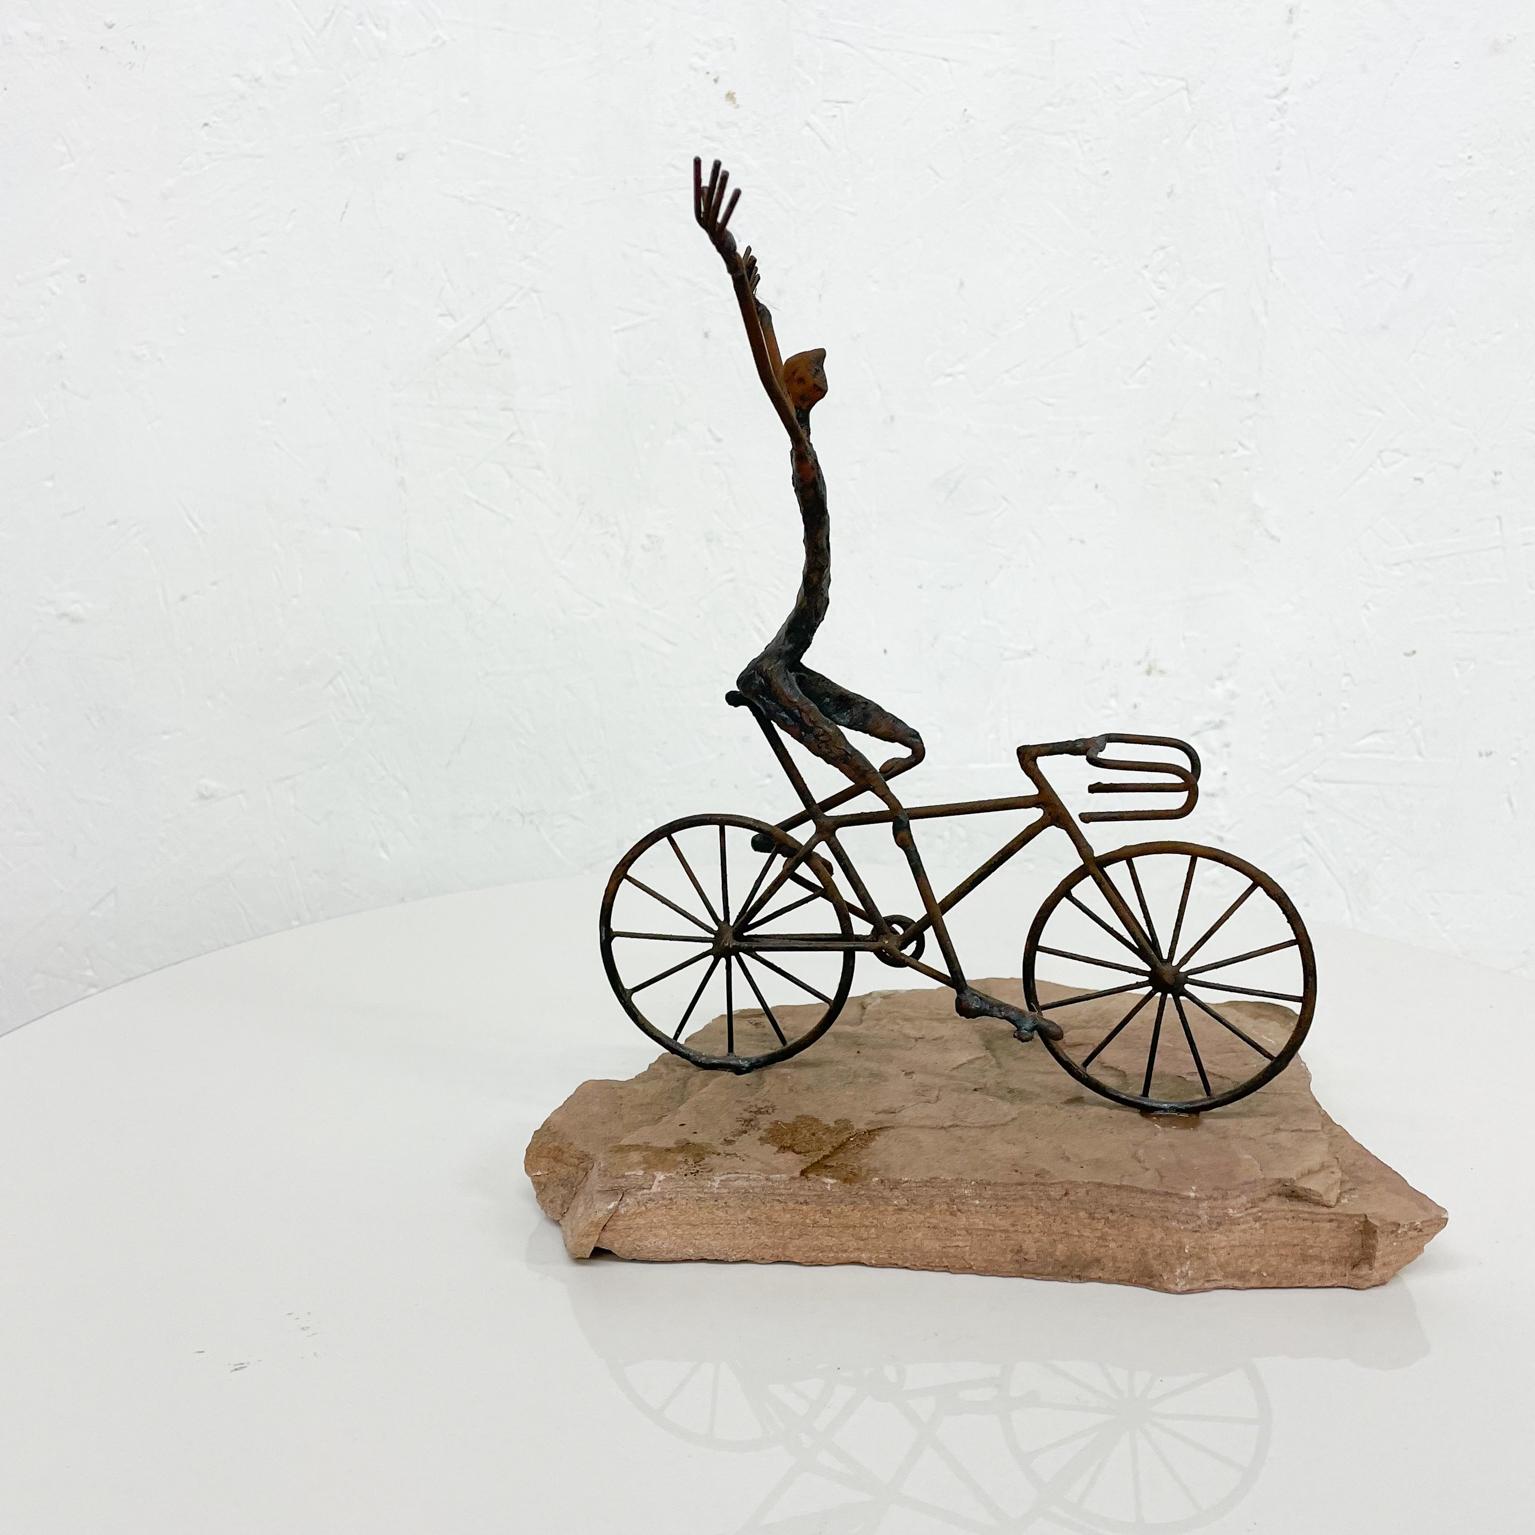 Bicycle Art Metal Sculpture on Stone in the Style of Jack Boyd 1970s 2